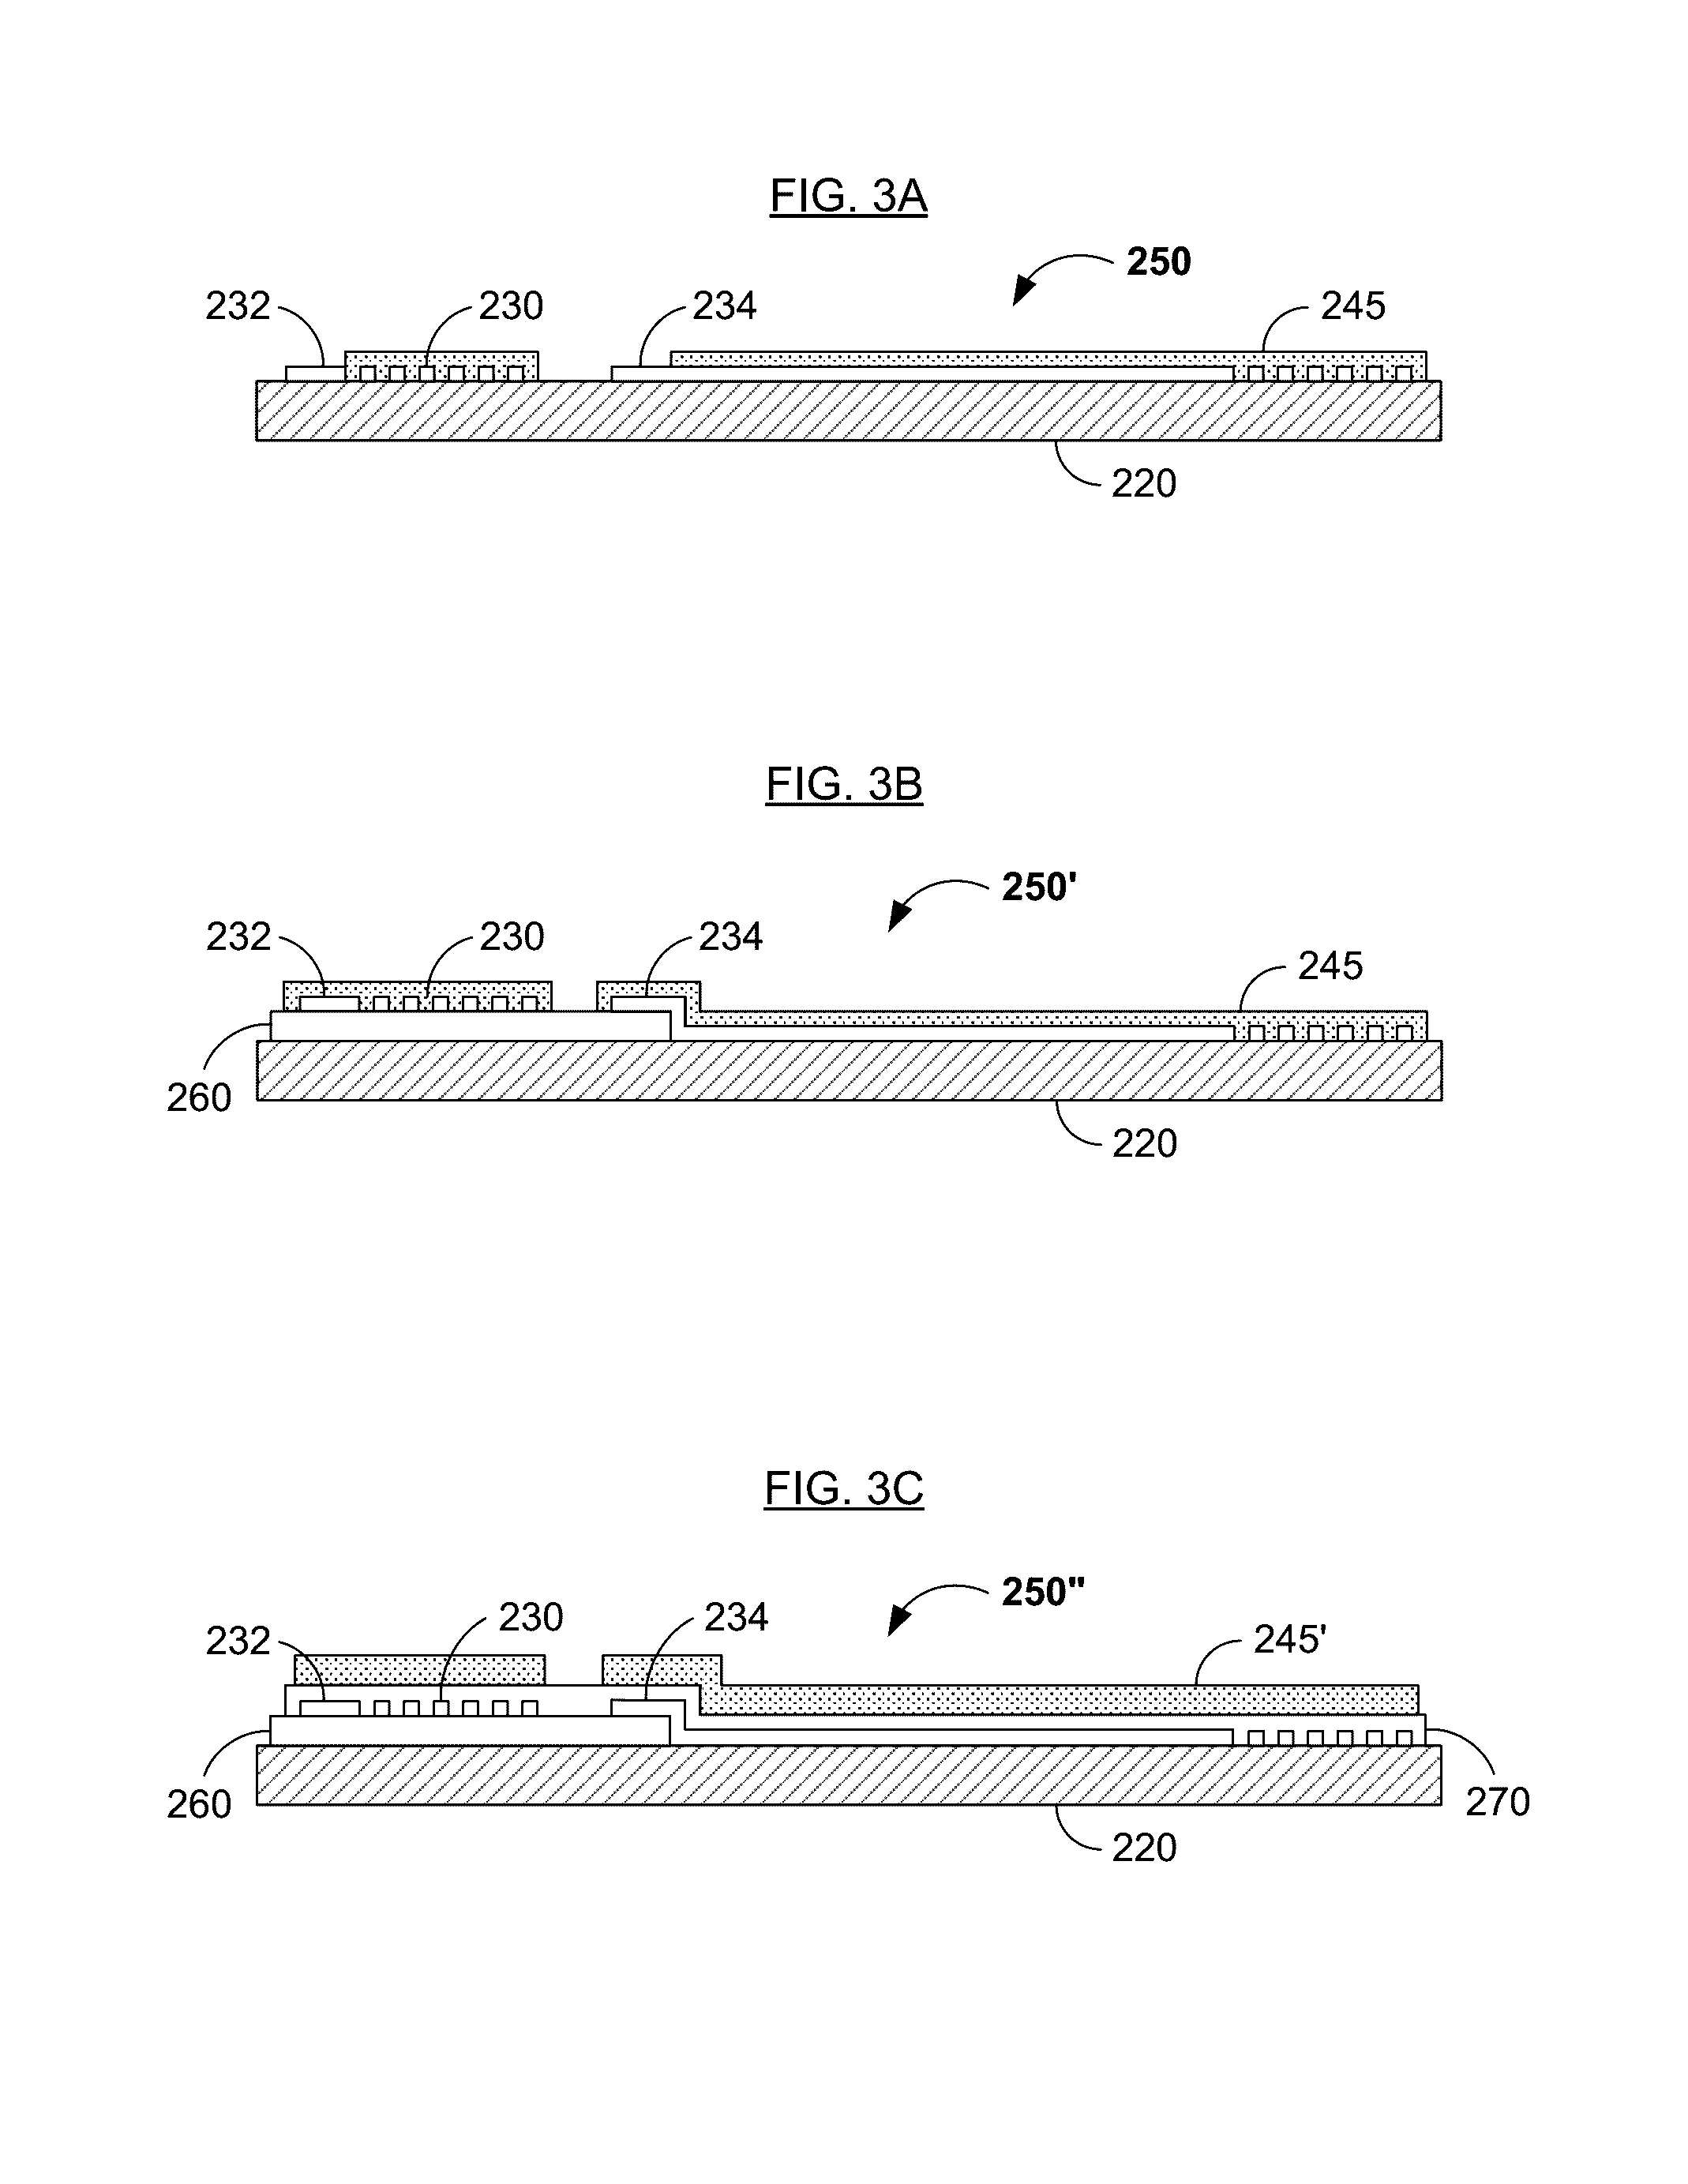 Wireless Communication Device with Integrated Ferrite Shield and Antenna, and Methods of Manufacturing the Same